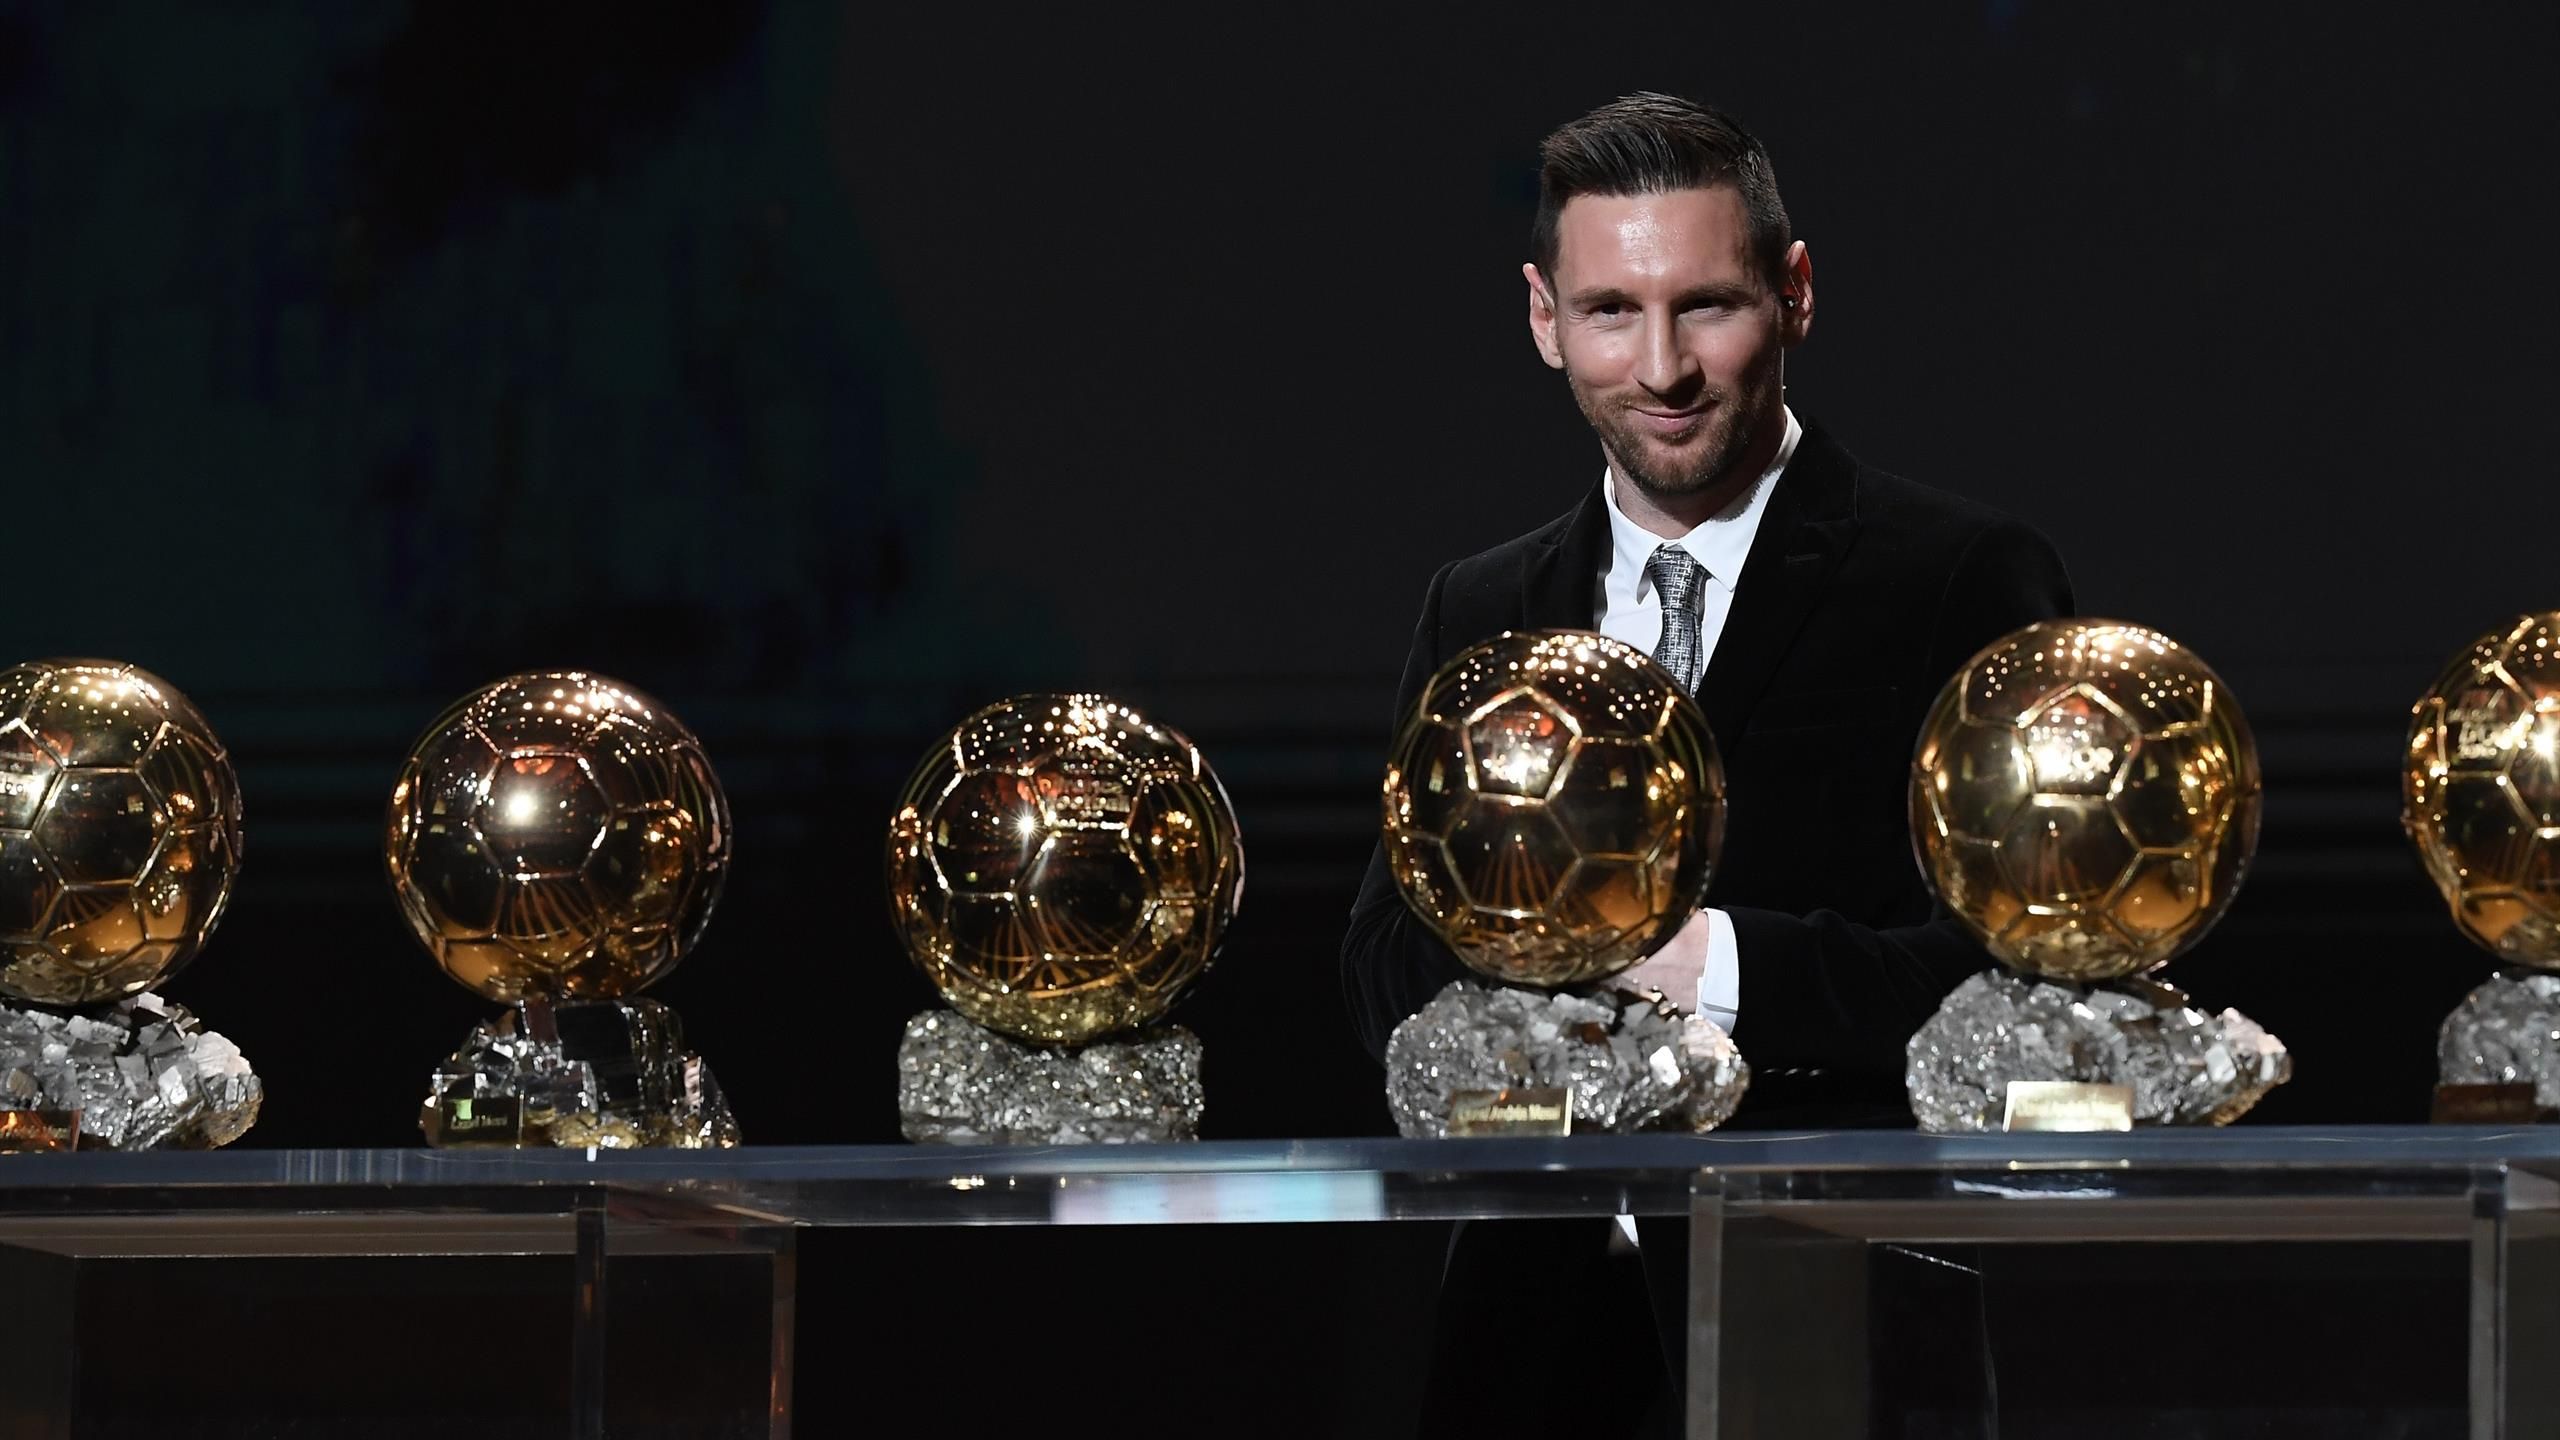 When is the Ballon dOr 2021, who is nominated for the awards and how can I watch a livestream?